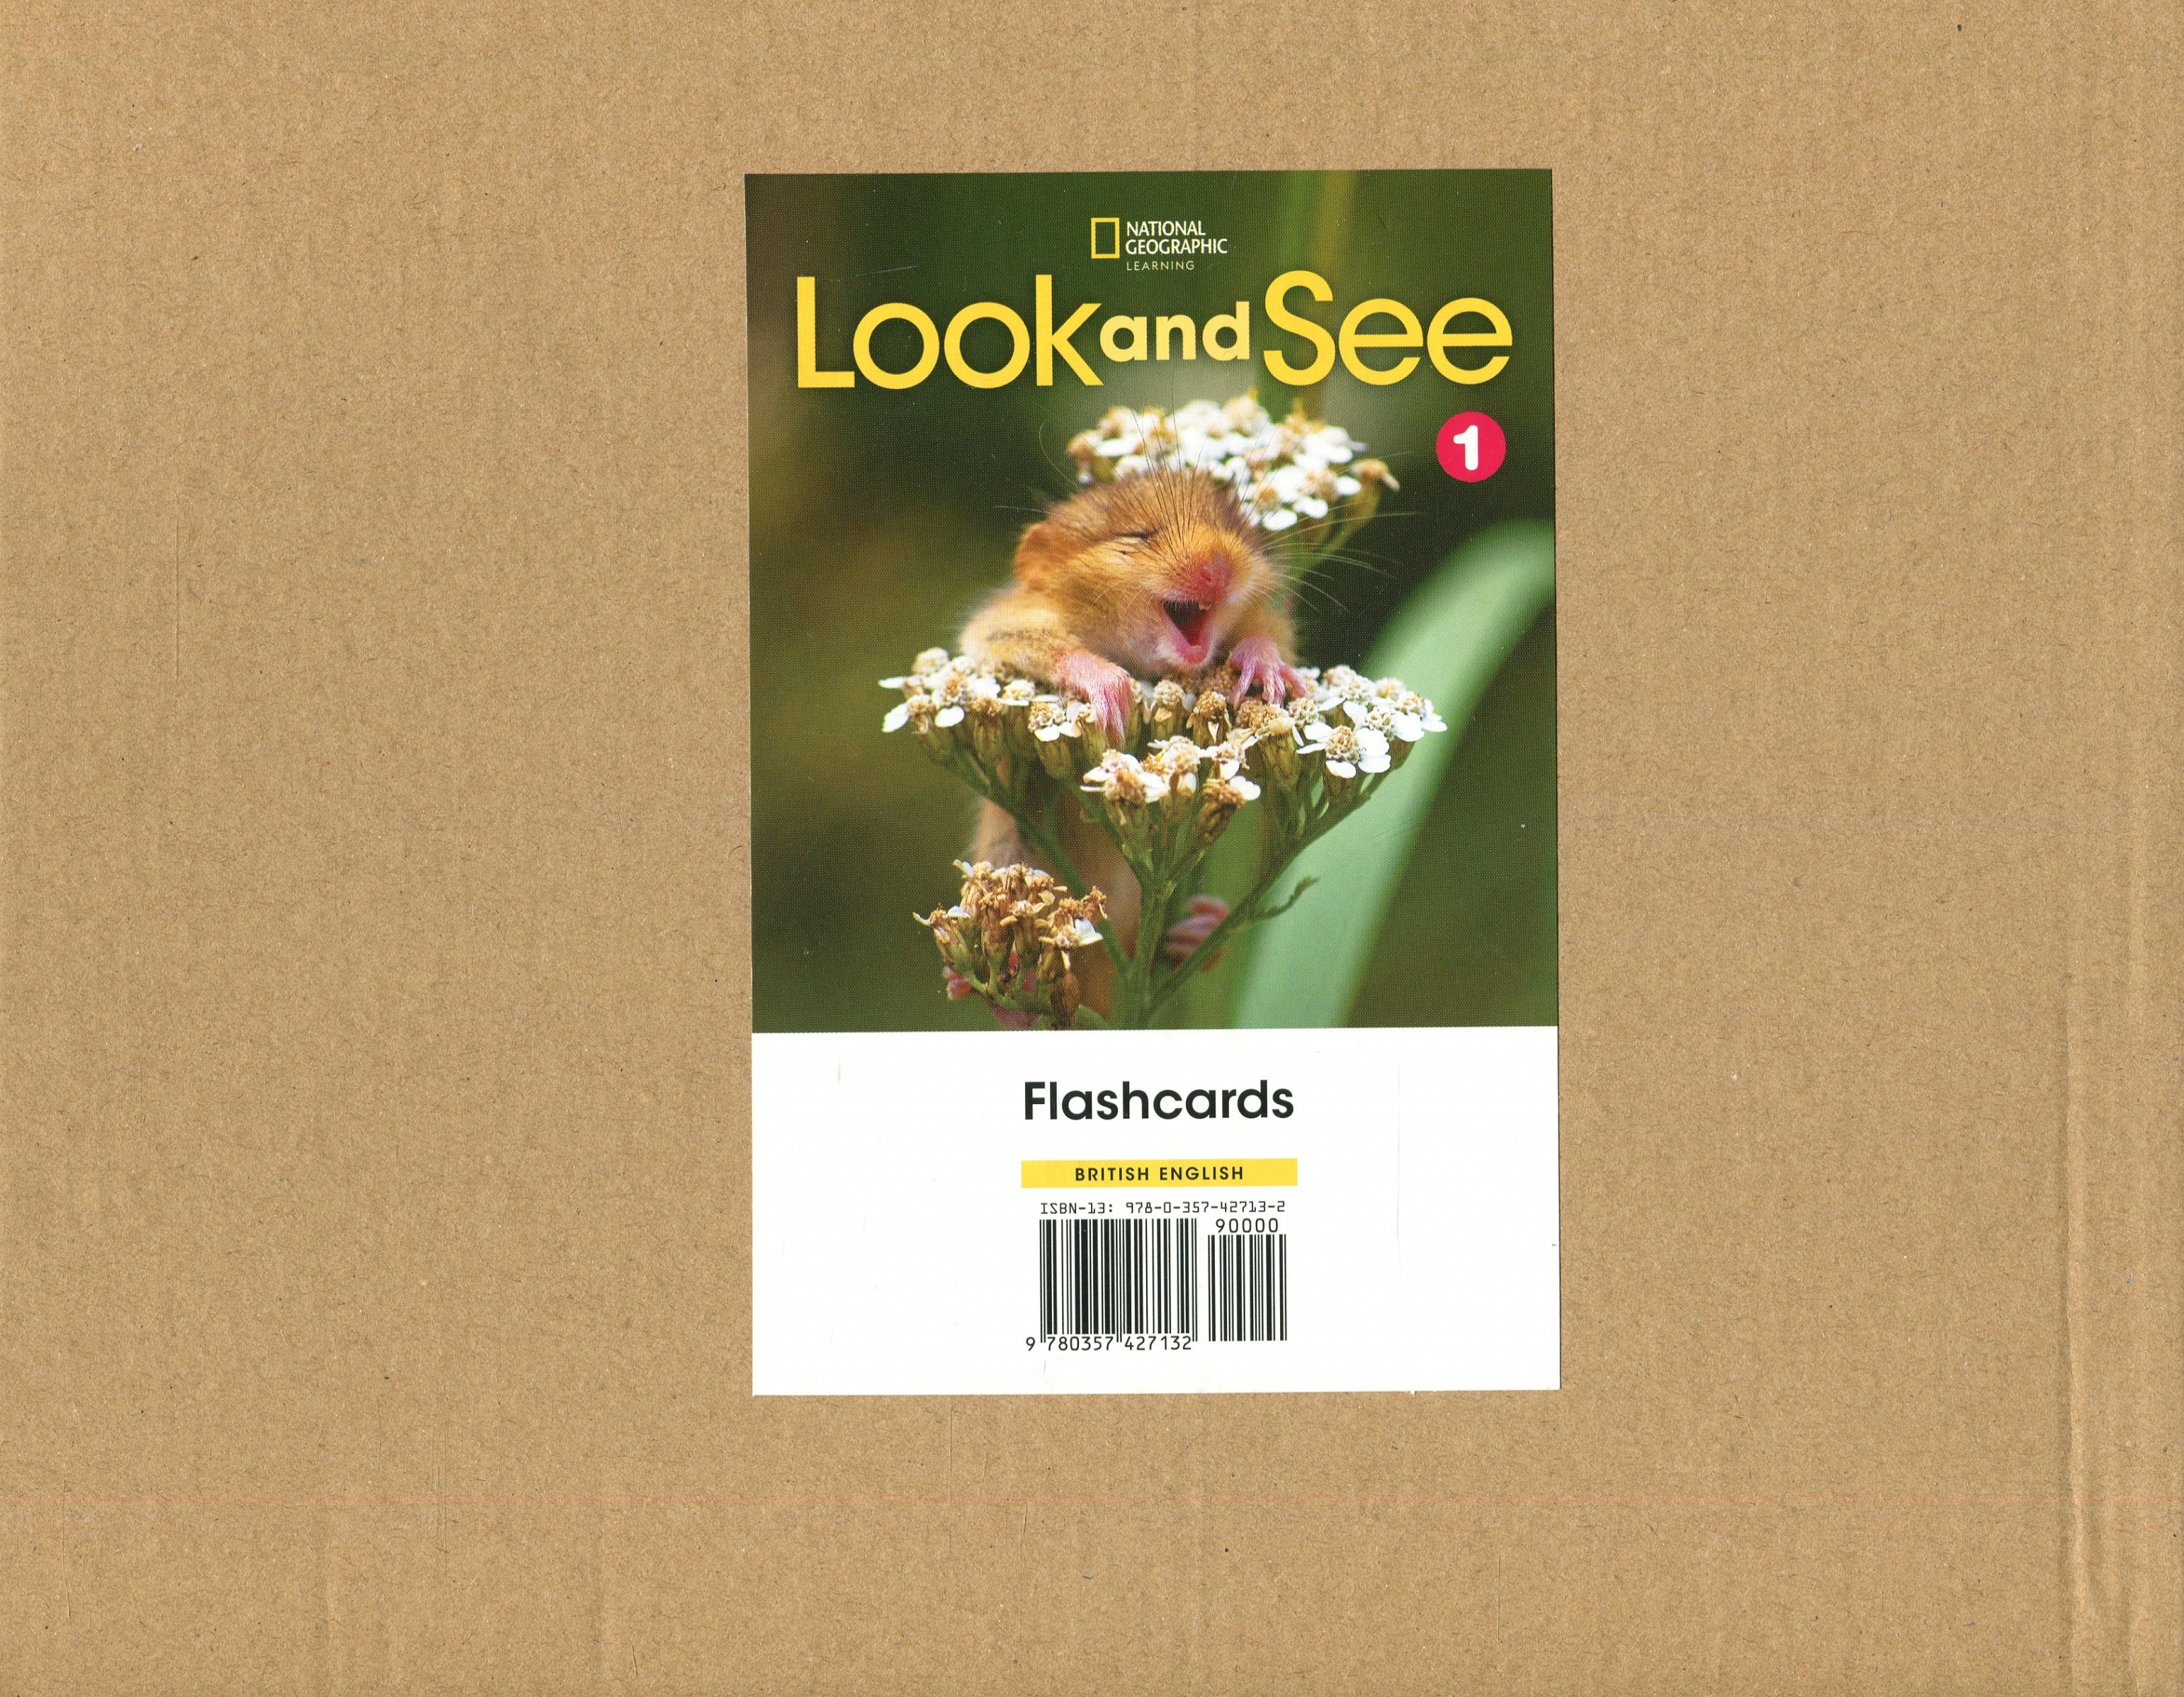 Reed S. Look and See 1 Flashcards 